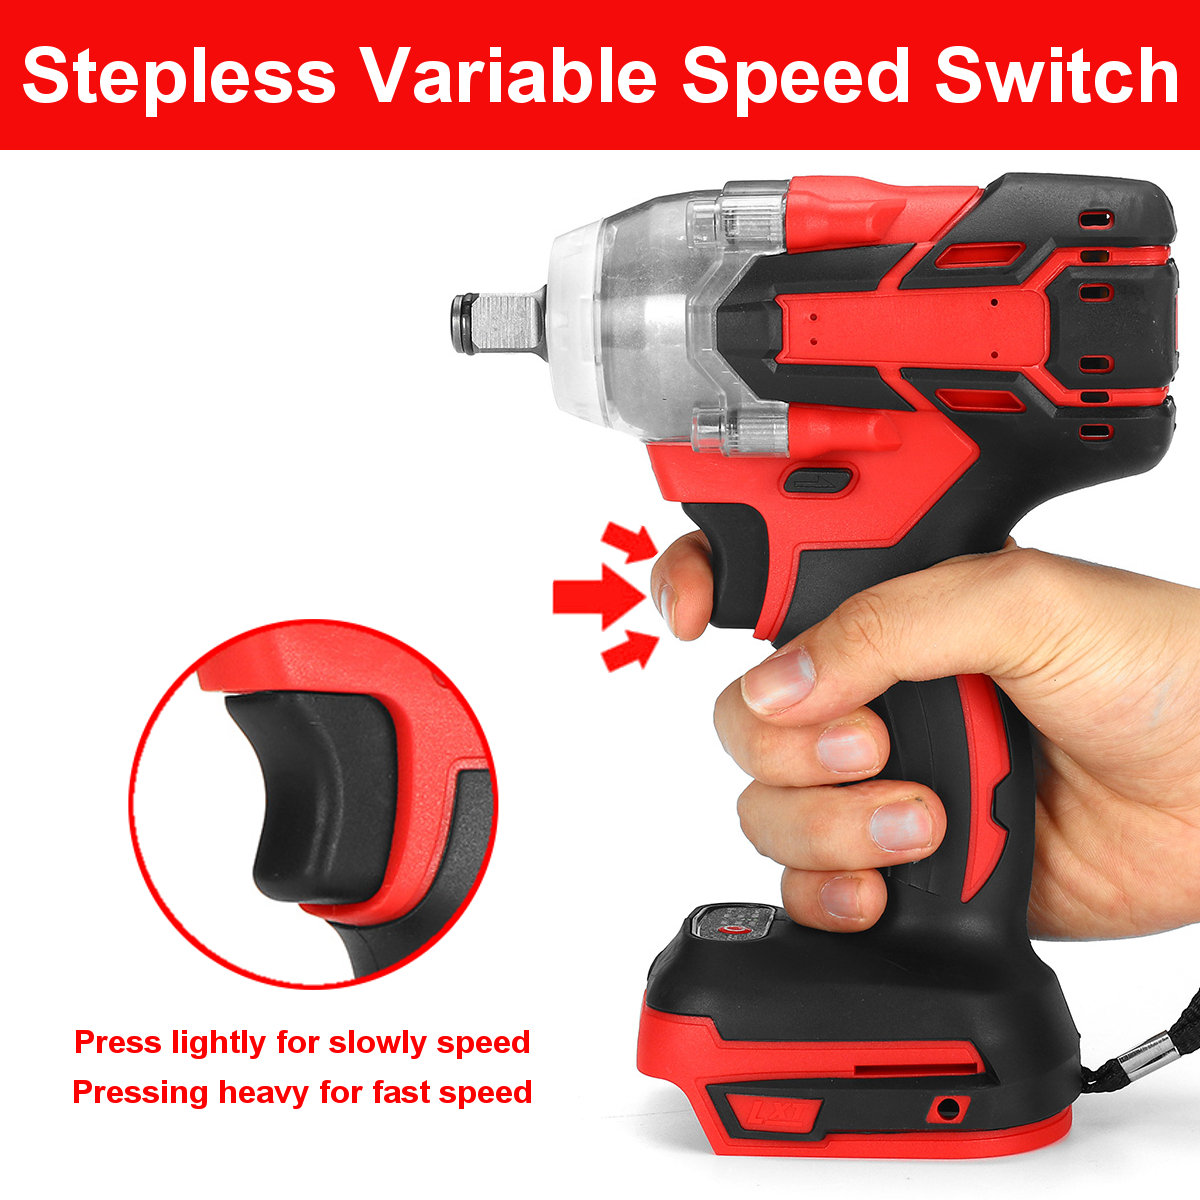 800Nm-Brushless-Cordless-Electric-12quot-Wrench-14quot-Screwdriver-Drill-Replacement-for-Makita-18V--1784389-4